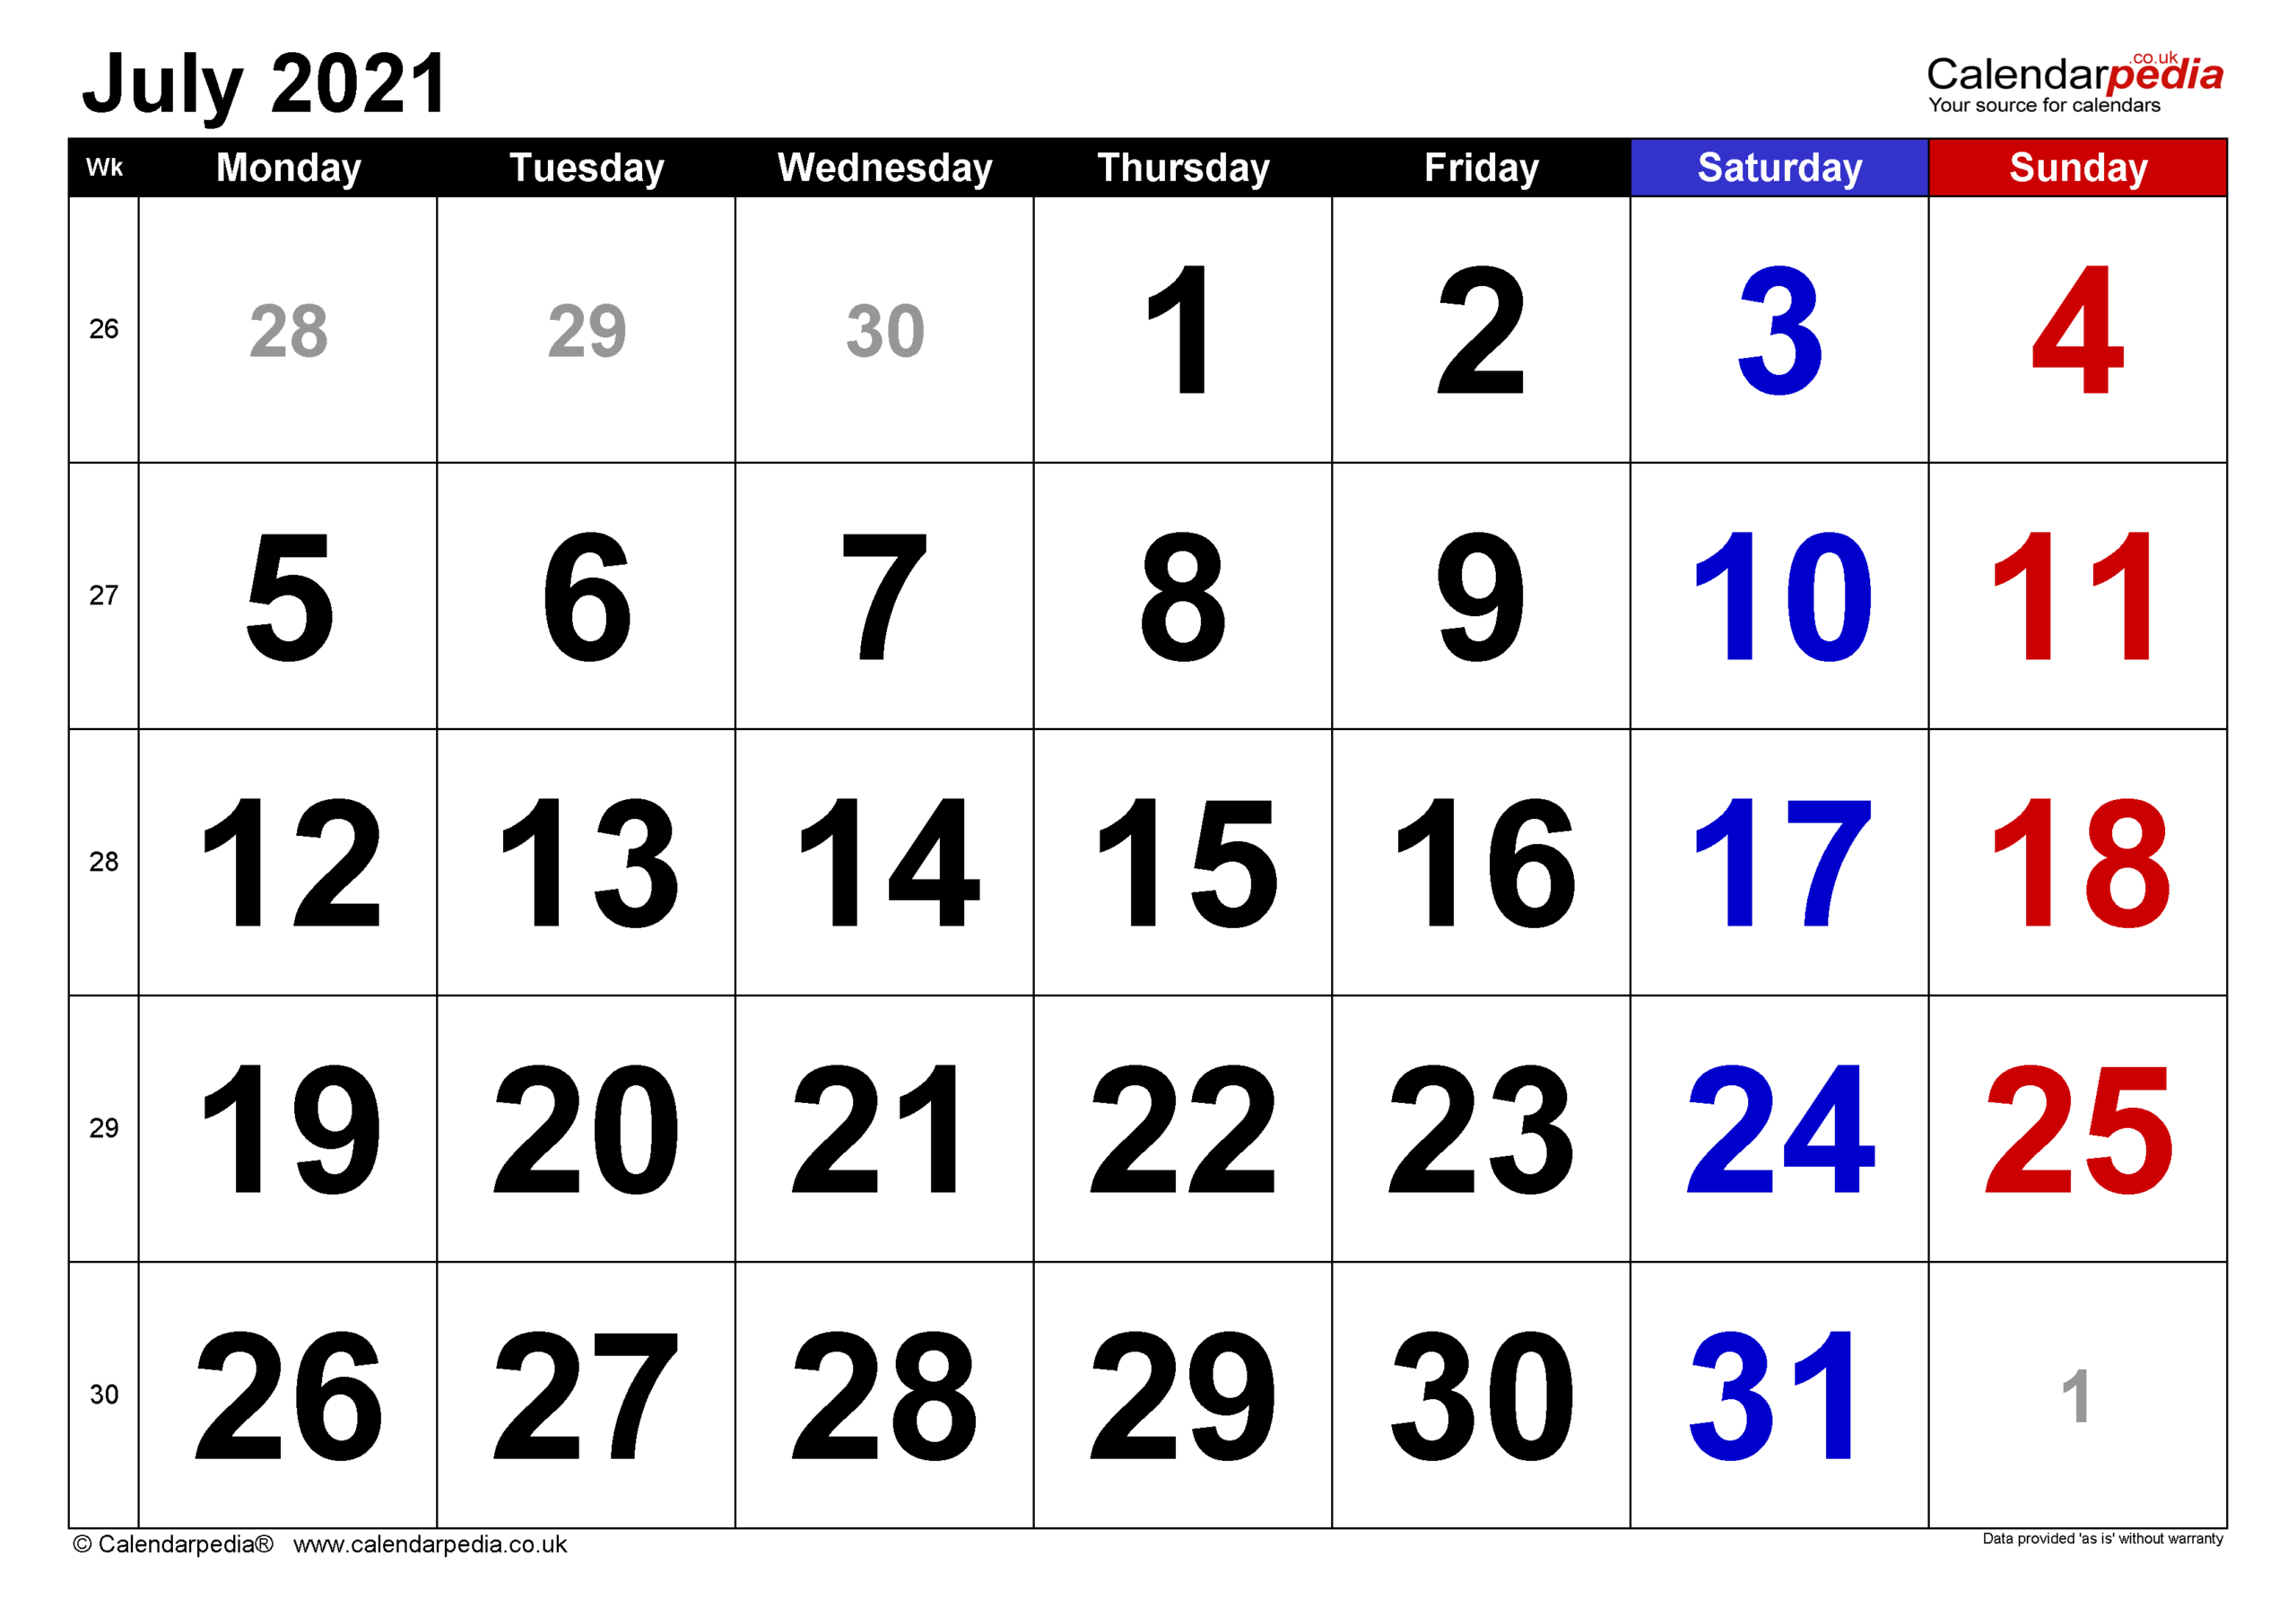 Calendar July 2021 Uk With Excel, Word And Pdf Templates-July 2021 Calendar